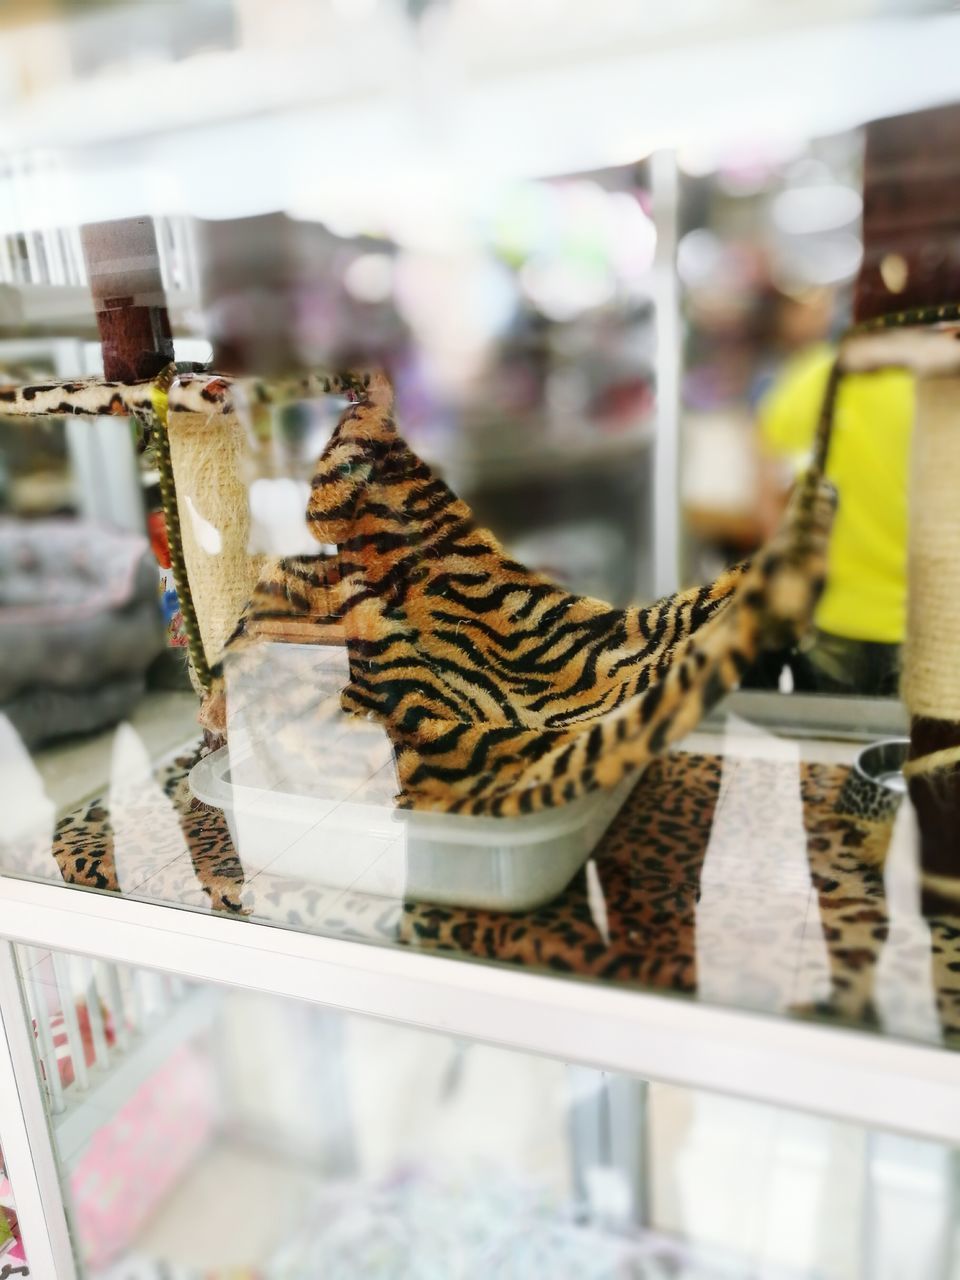 animal themes, animal, retail, indoors, shopping, retail display, store, no people, choice, glass - material, for sale, transparent, business, variation, shelf, group of animals, mammal, sale, selective focus, pets, consumerism